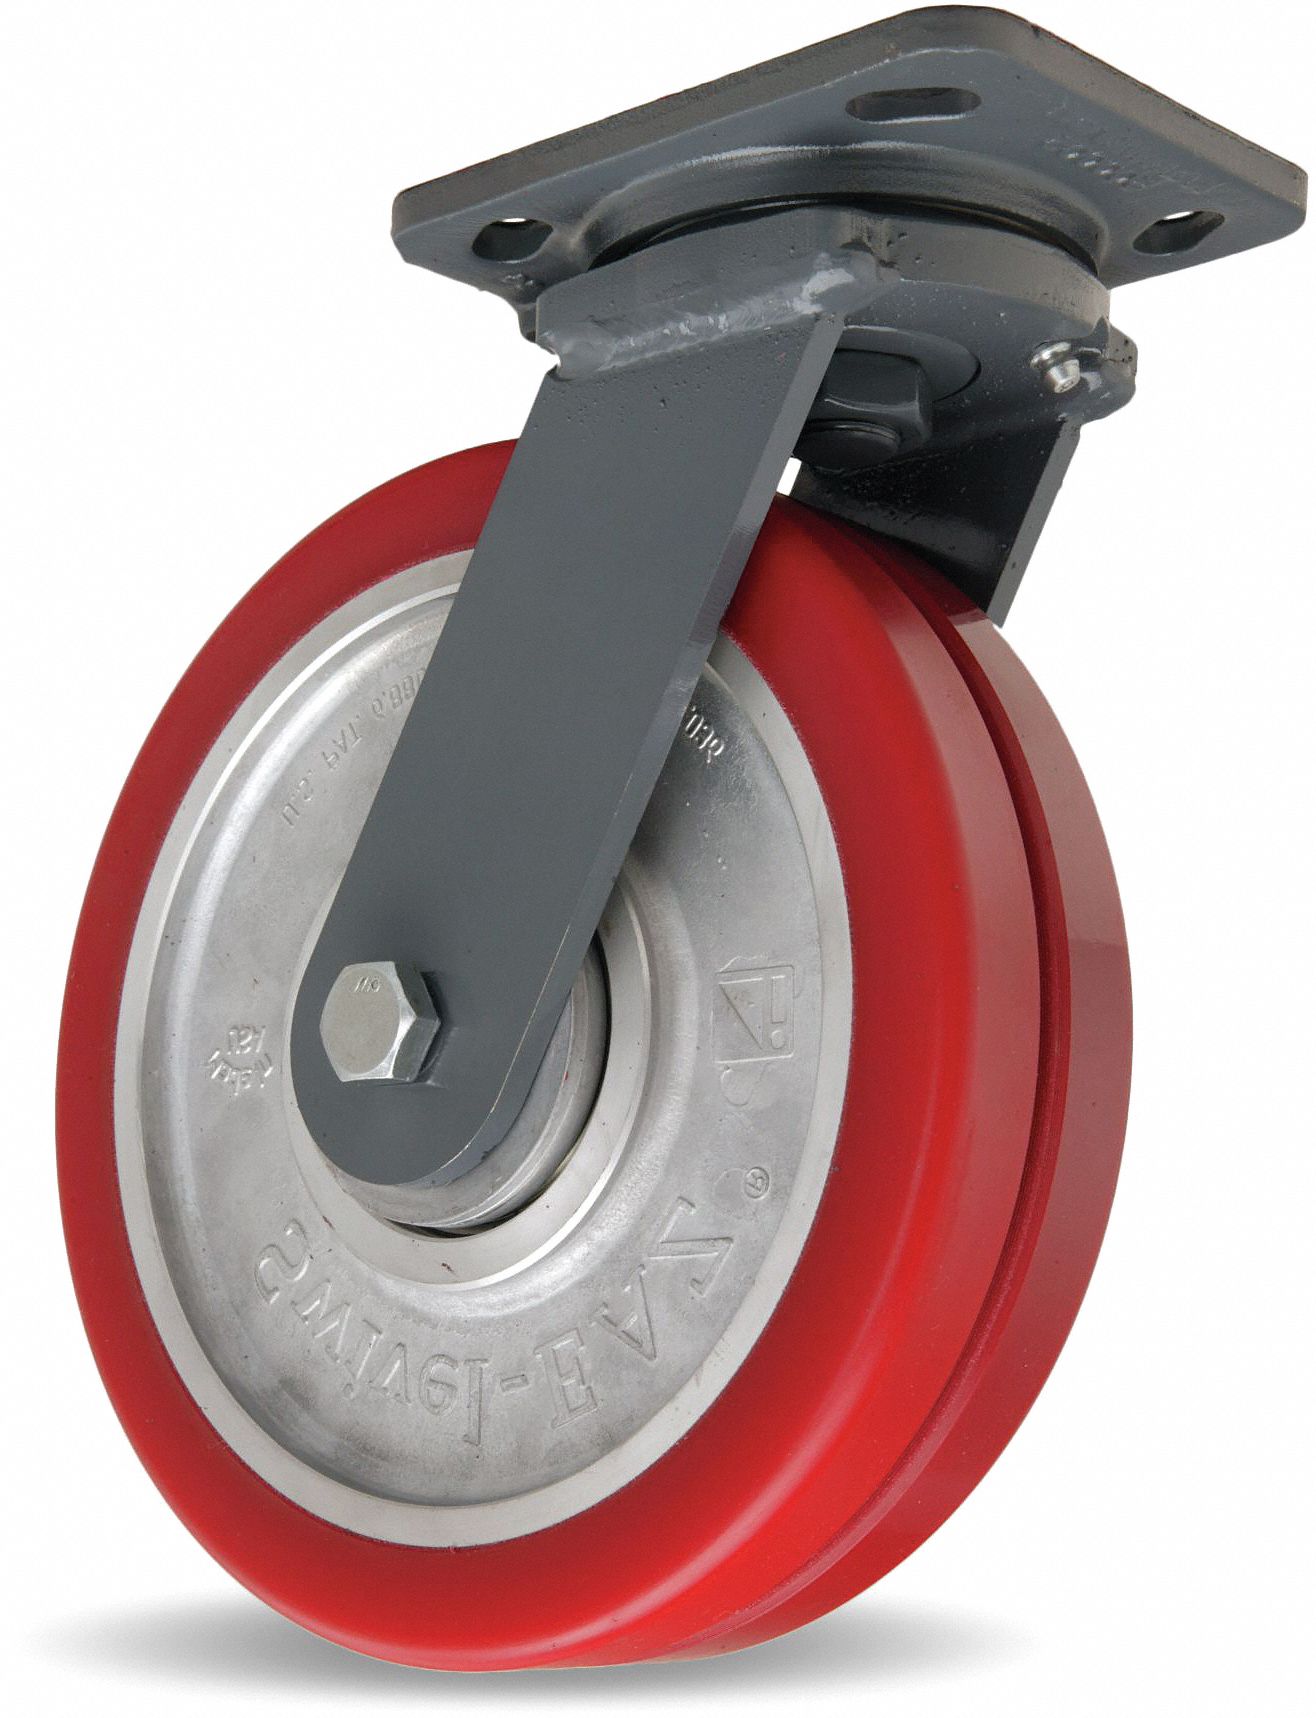 SY America 6 4 Pack Plate Caster Heavy Duty Swivel Polyurethane Mold on Steel Wheel w/Precision Ball Bearing Top Plate Caster Extra Width 2 inches 5000 lbs Total Capacity 6 inches Pack of 4 